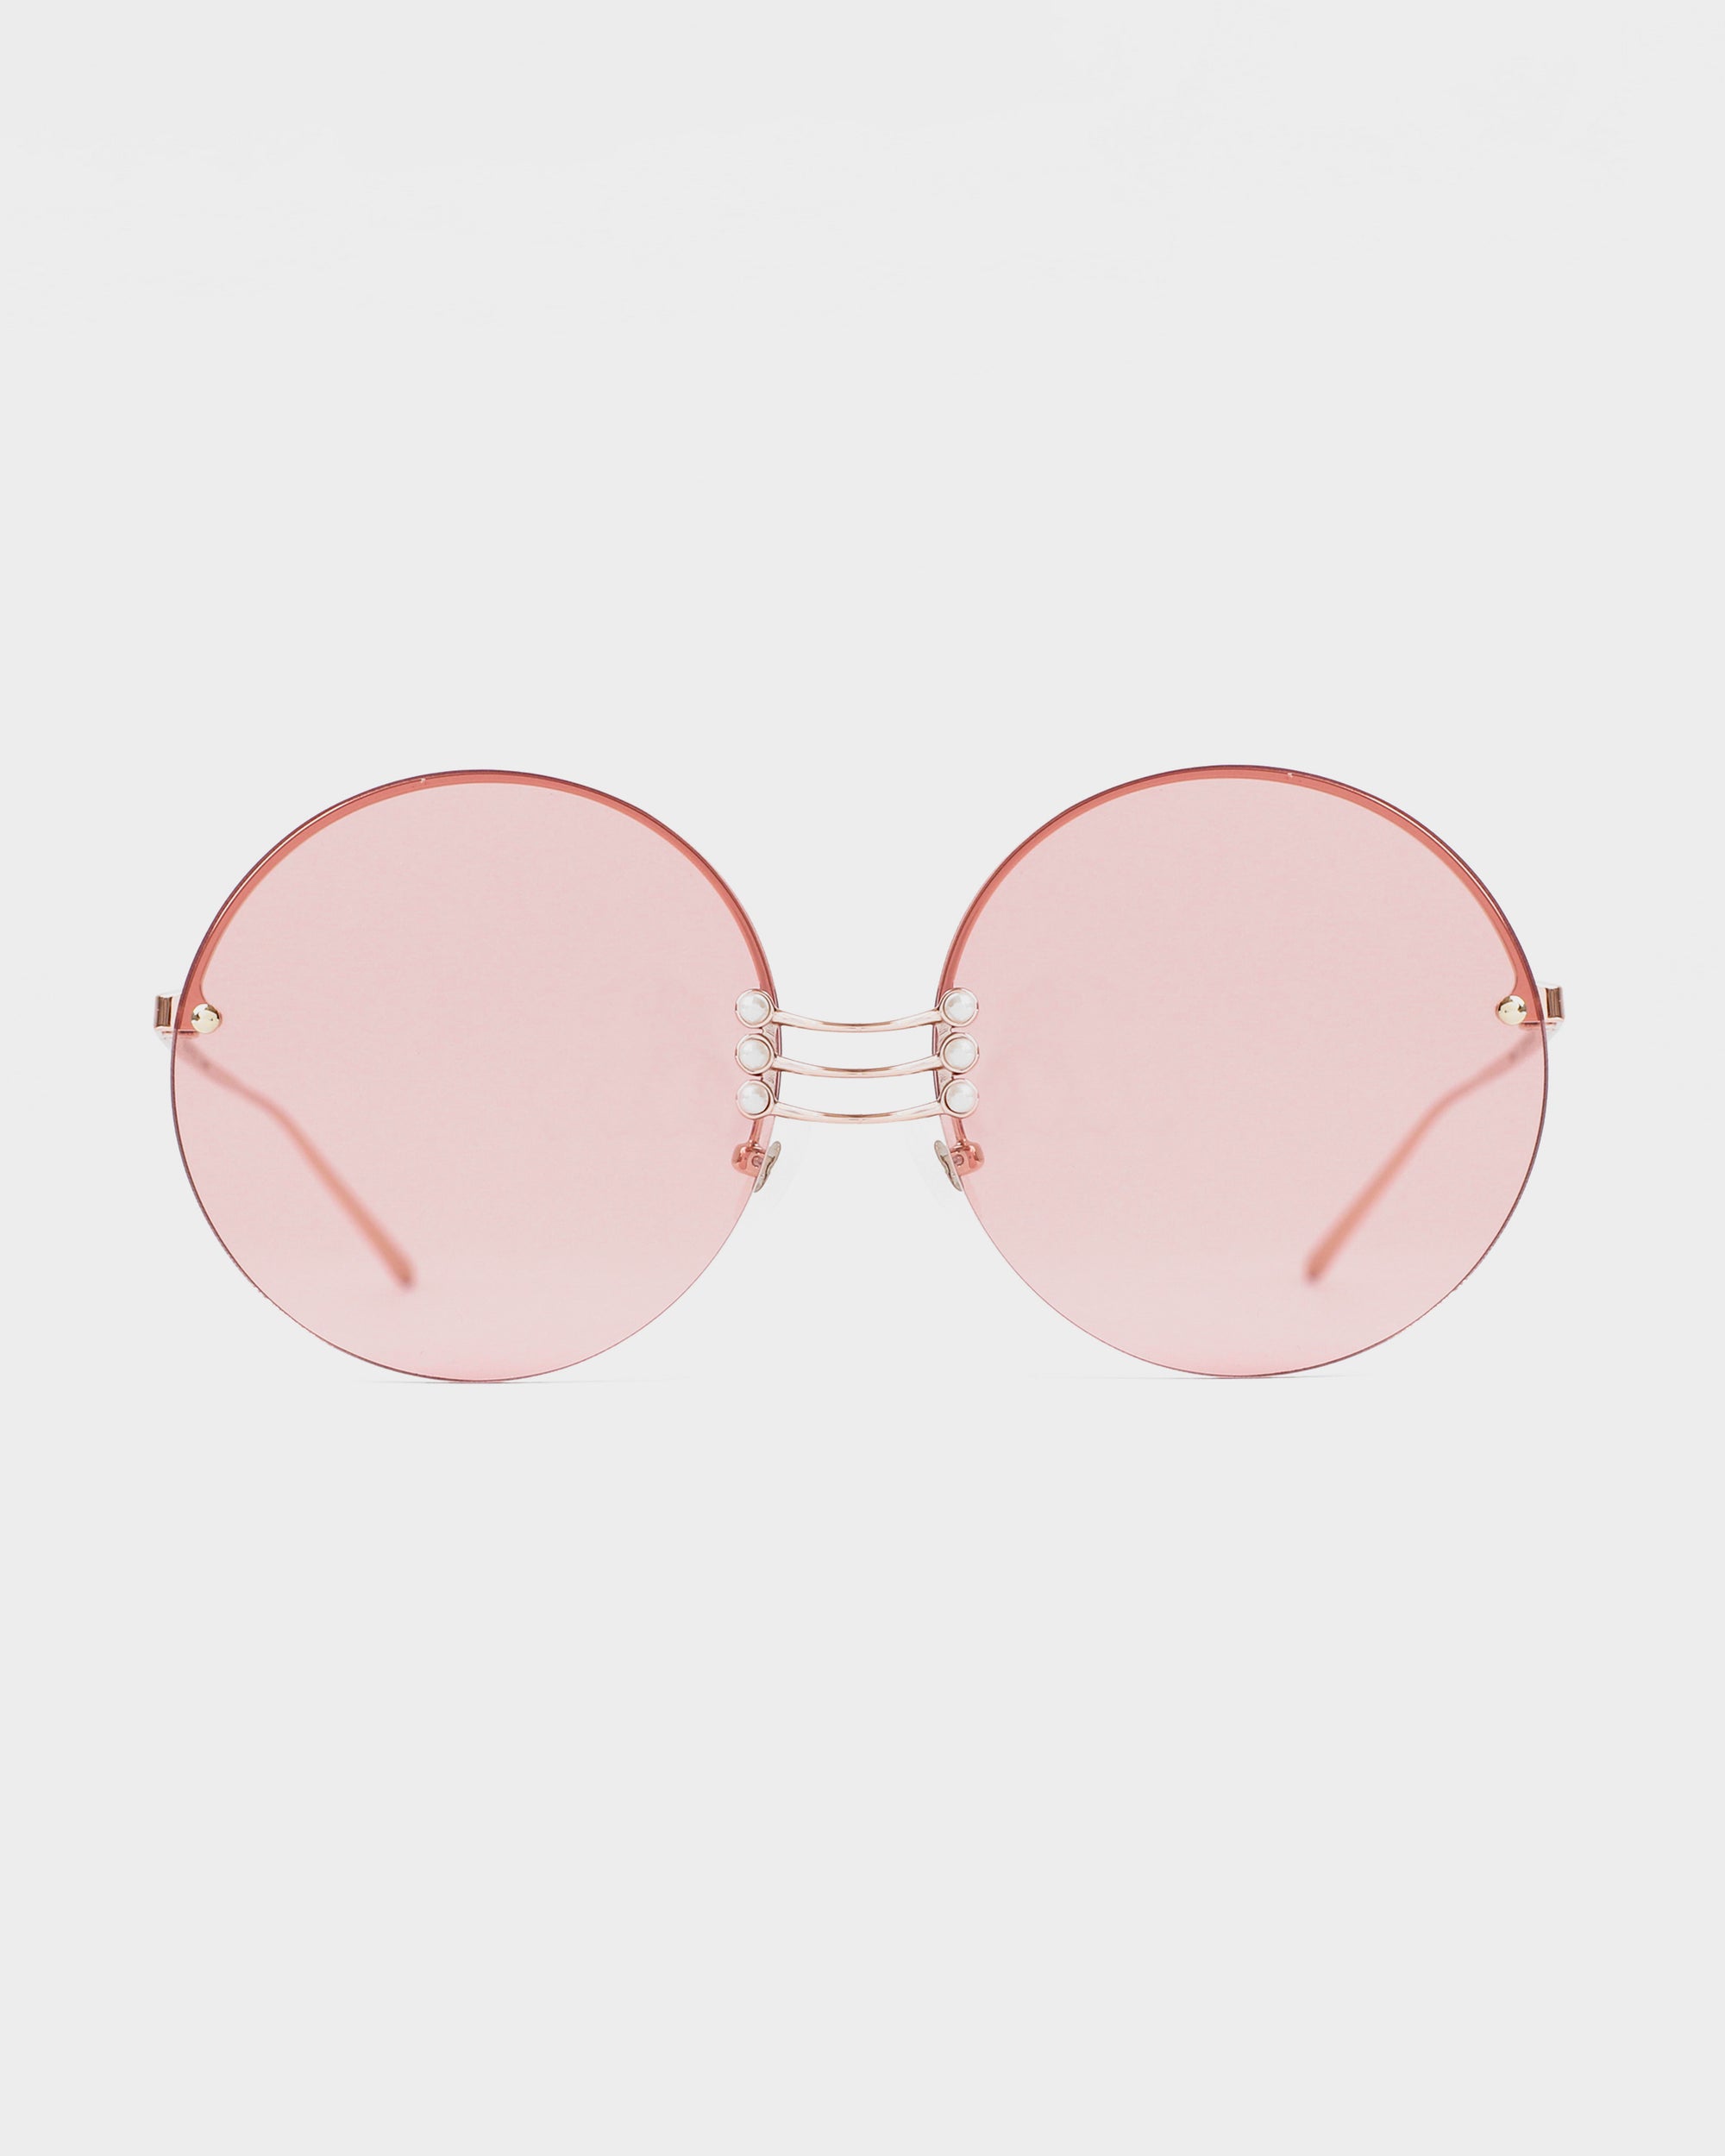 A pair of round, rimless For Art's Sake® Vermeer sunglasses with pink-tinted lenses. Featuring UV protection, the sunglasses boast gold-toned bridge and temple arms, stainless steel frames, and a unique nose bridge design with three parallel thin bars. Gemstone nosepads add a touch of elegance. The background is plain white.